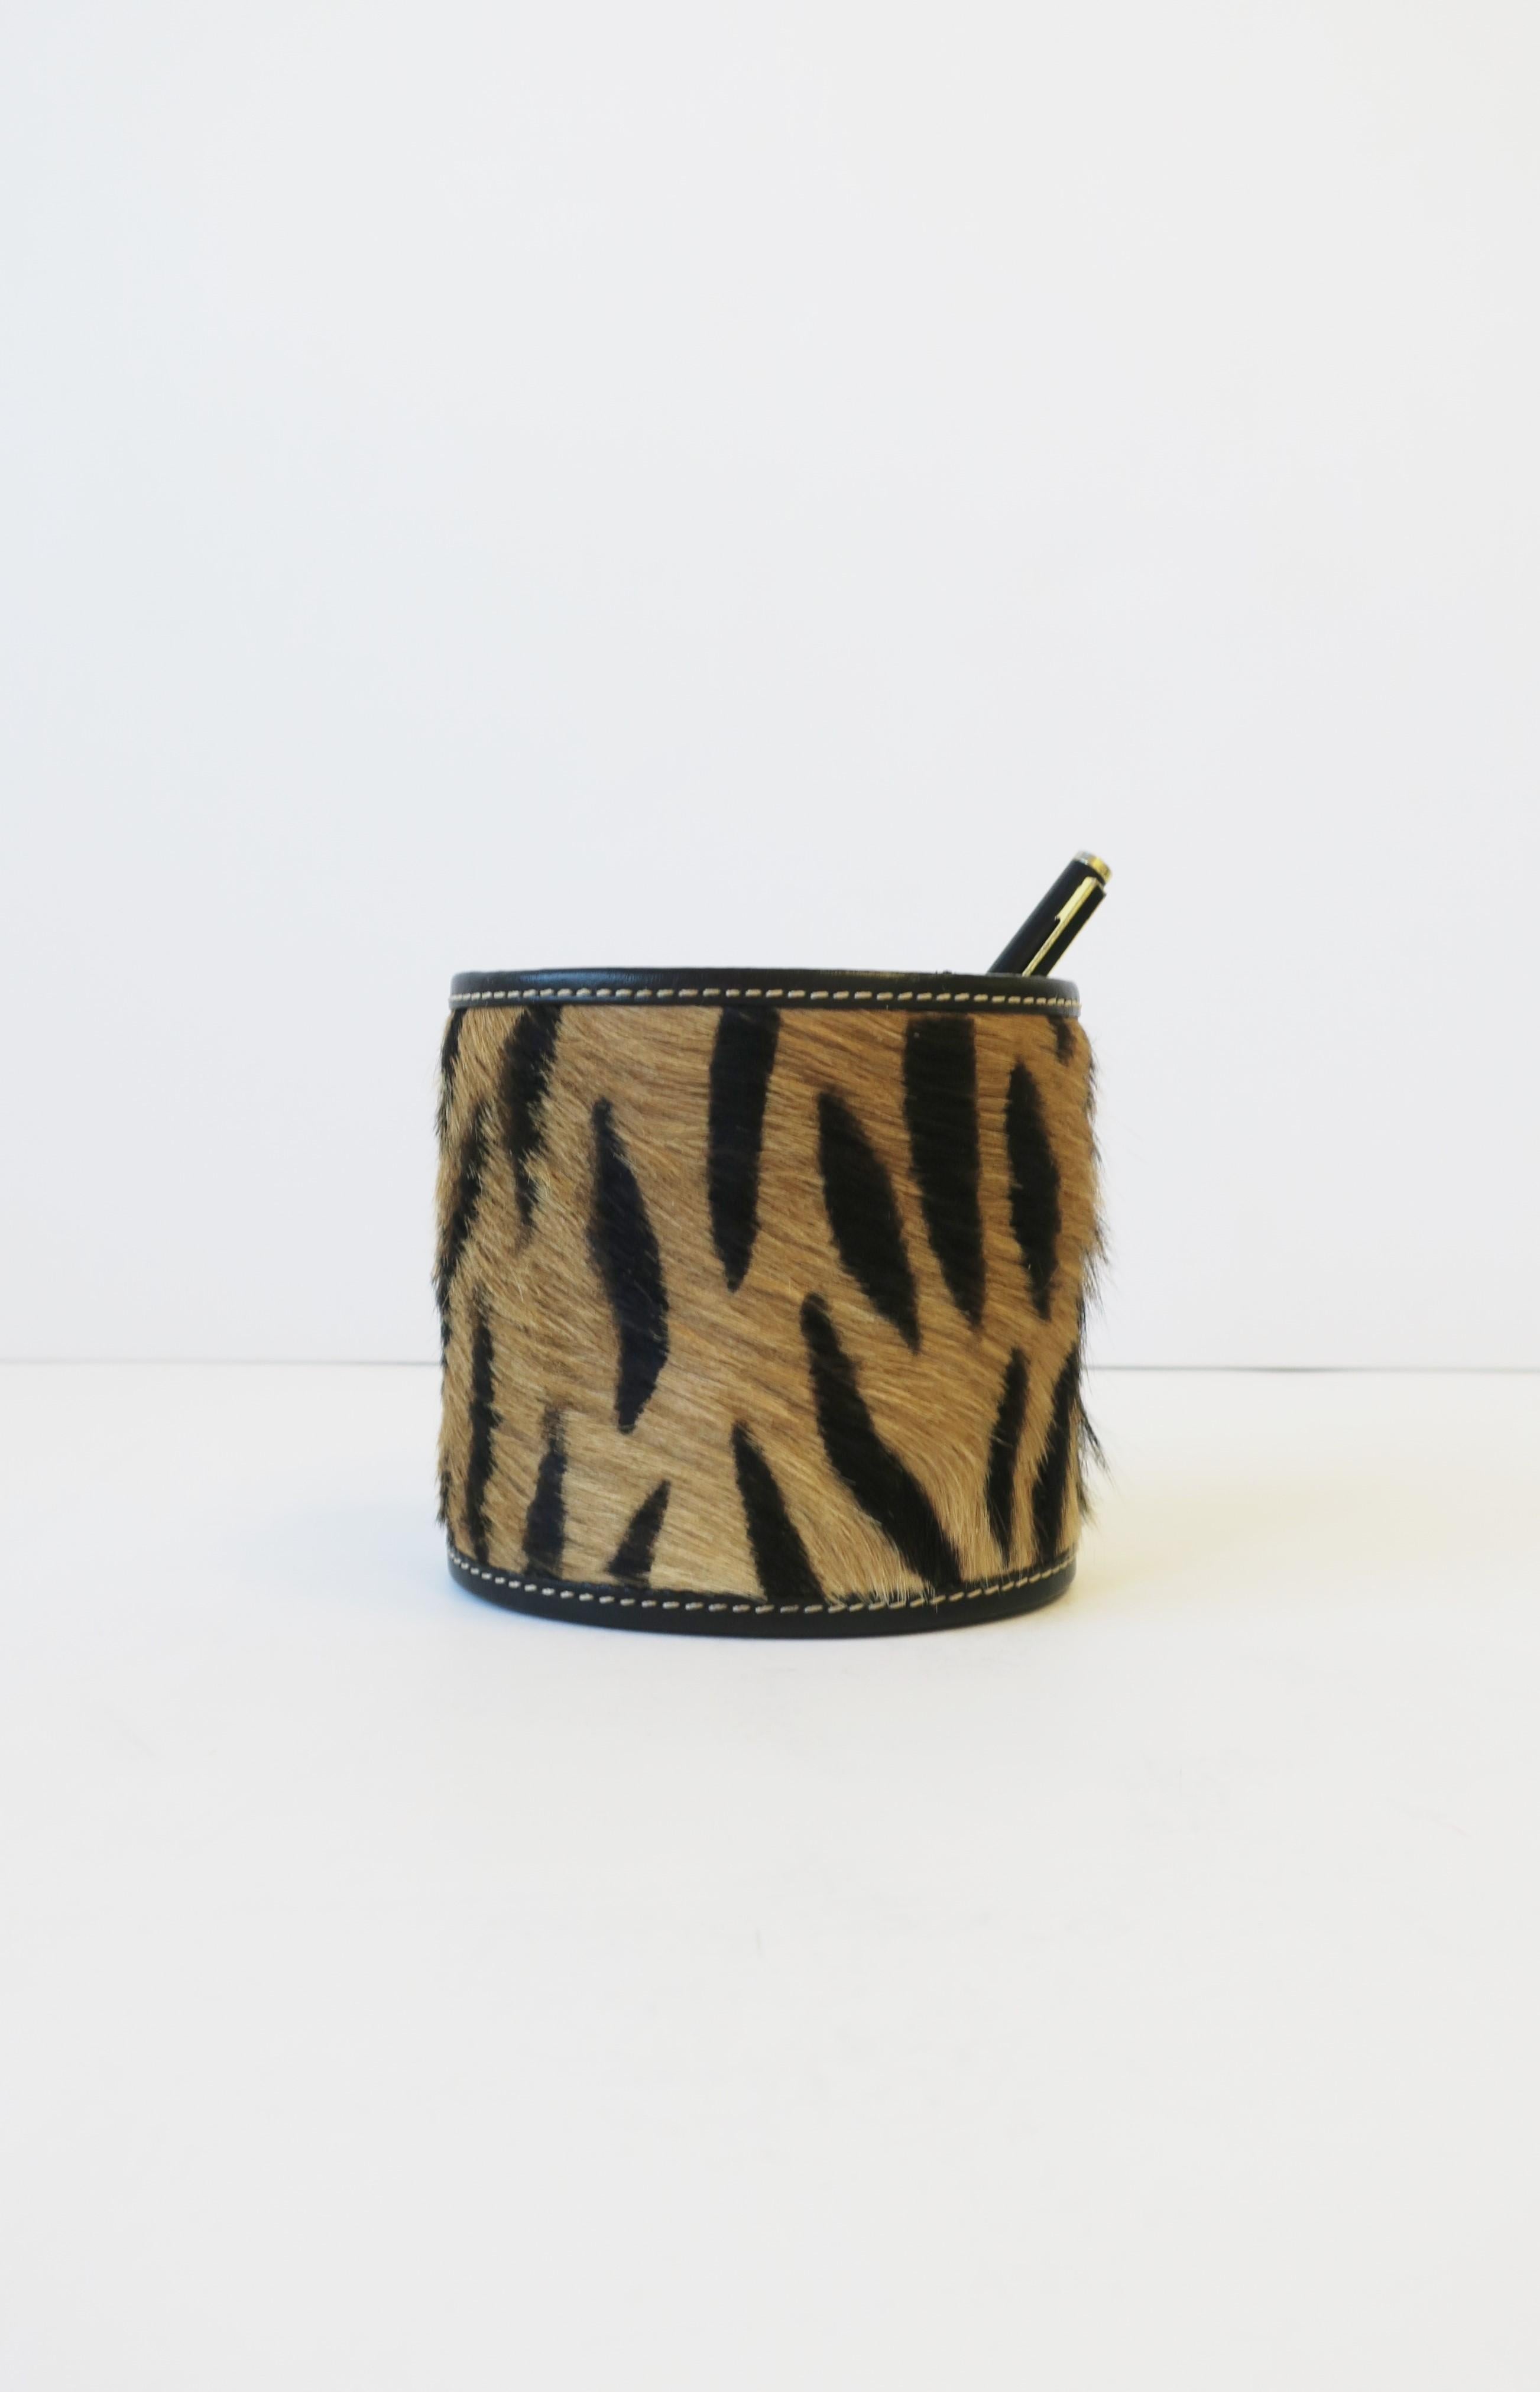 Authentic animal hide 'tiger-esque' oval pen or pencil holder with red velvet interior, circa 1990s, late-20th century. A great desk organizing piece/accessory. Colors include: tan, black and red. 

Piece measures: 3